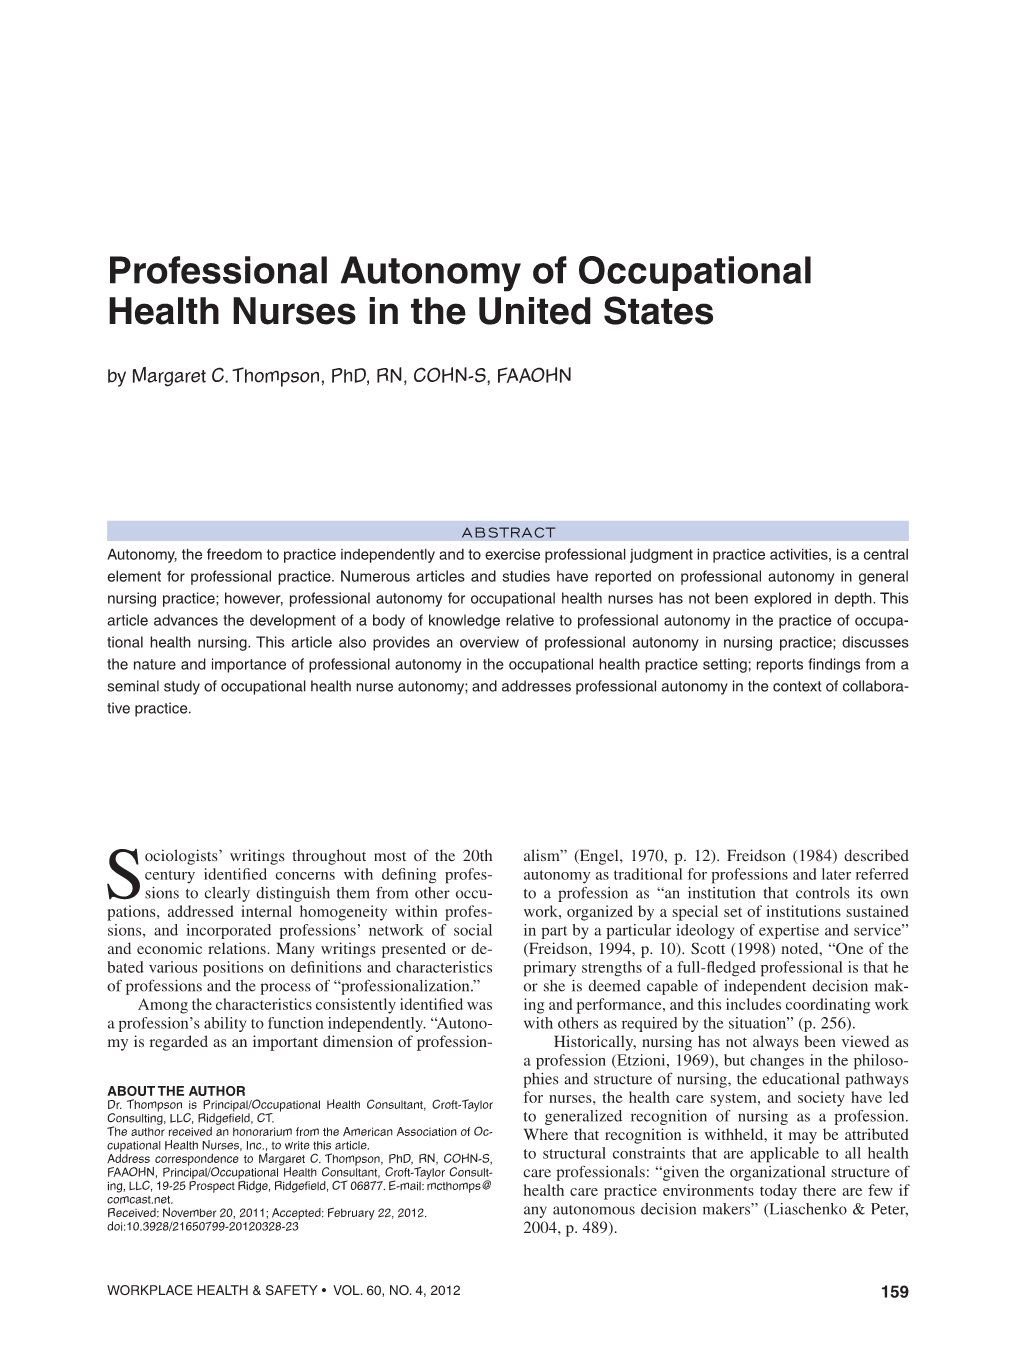 Professional Autonomy of Occupational Health Nurses in the United States